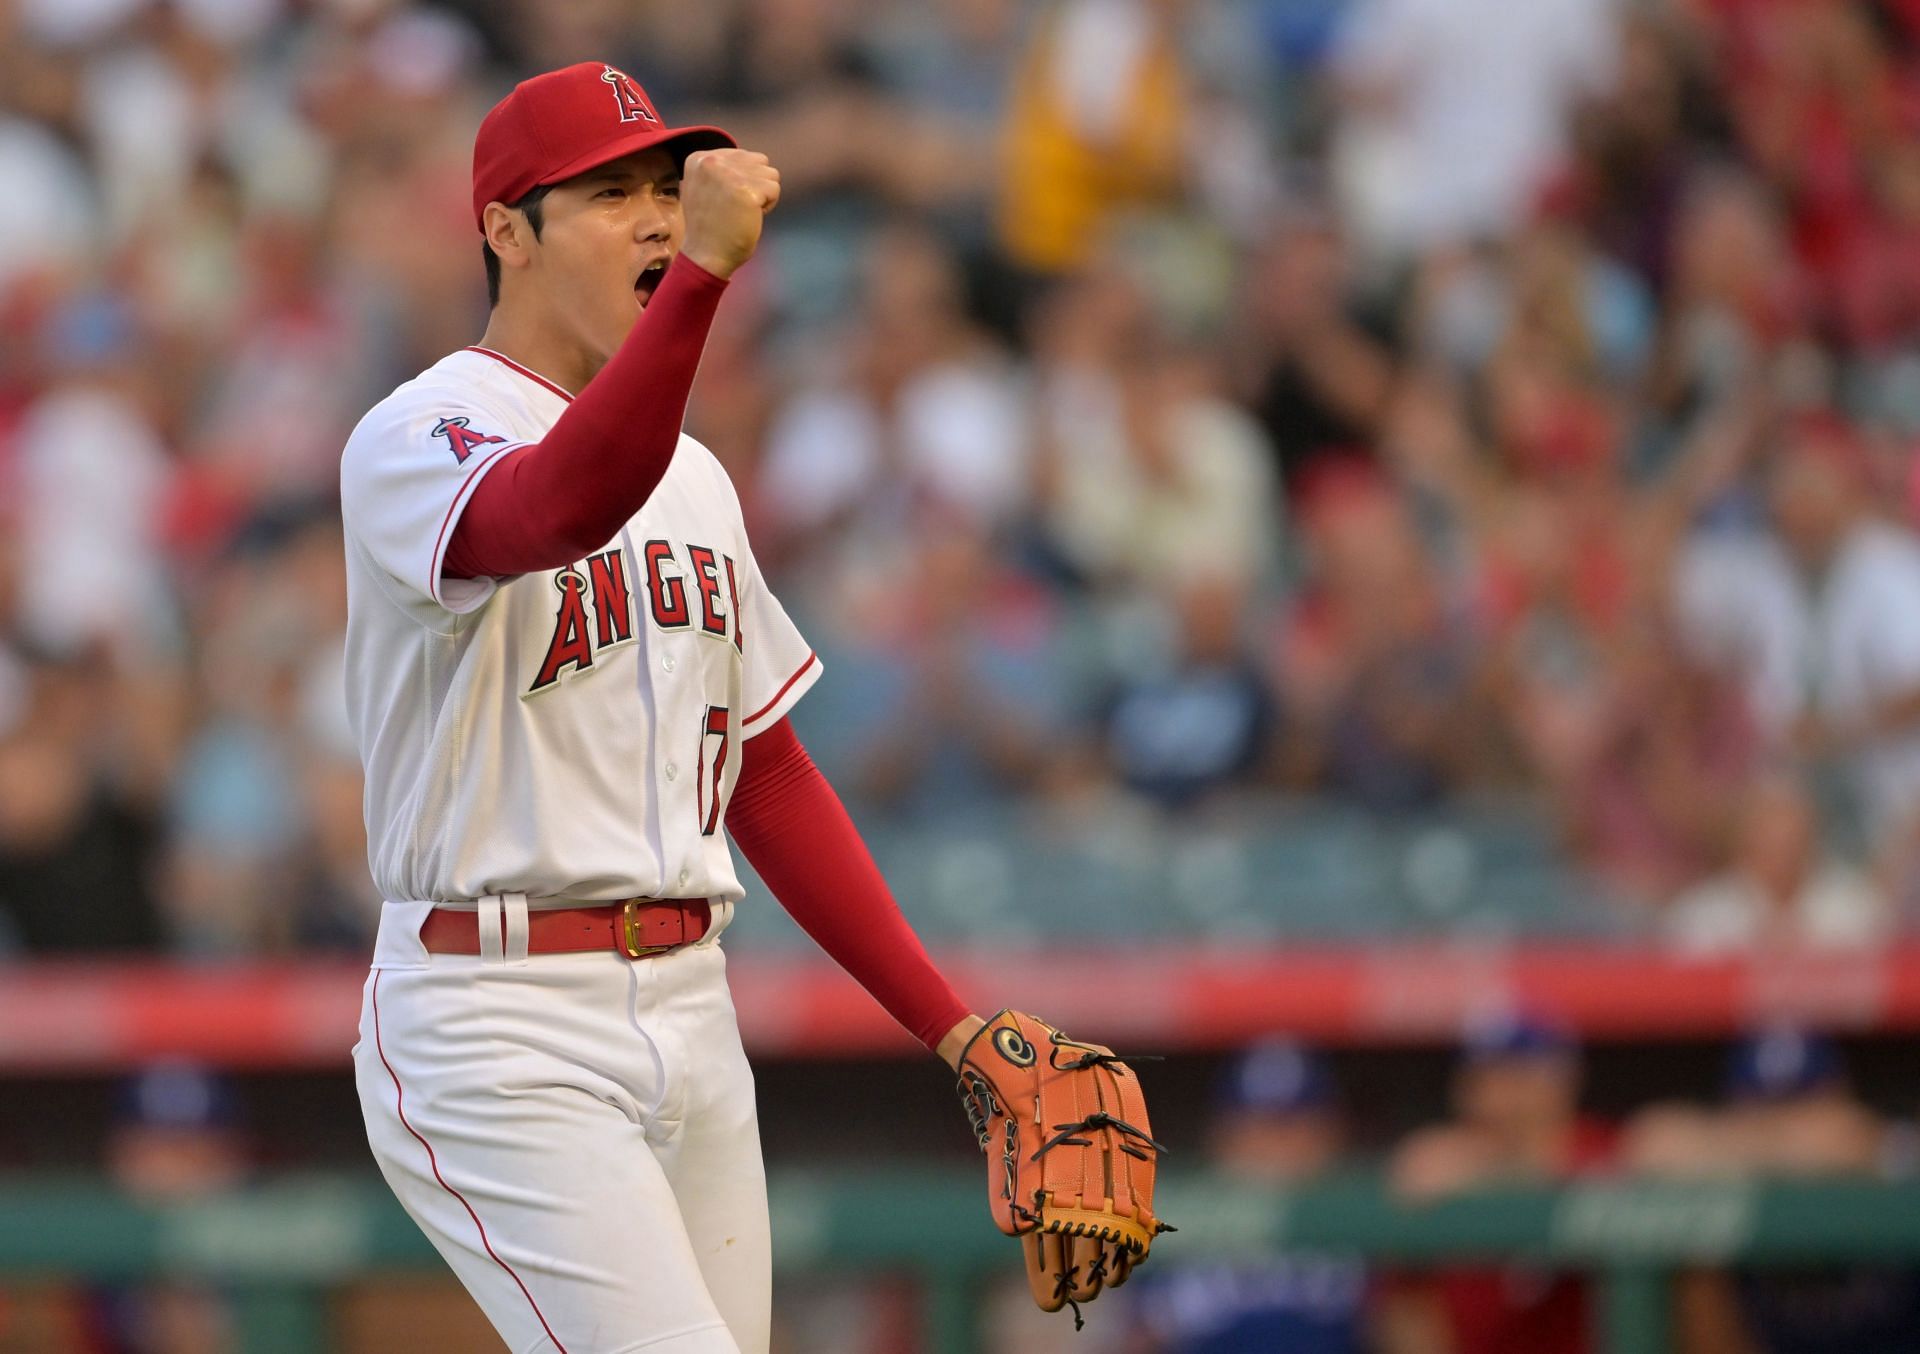 Shohei Ohtani #17 of the Los Angeles Angels reacts after pitching out of a bases loaded jam in the first inning against the Texas Rangers at Angel Stadium of Anaheim on July 28, 2022 in Anaheim, California.